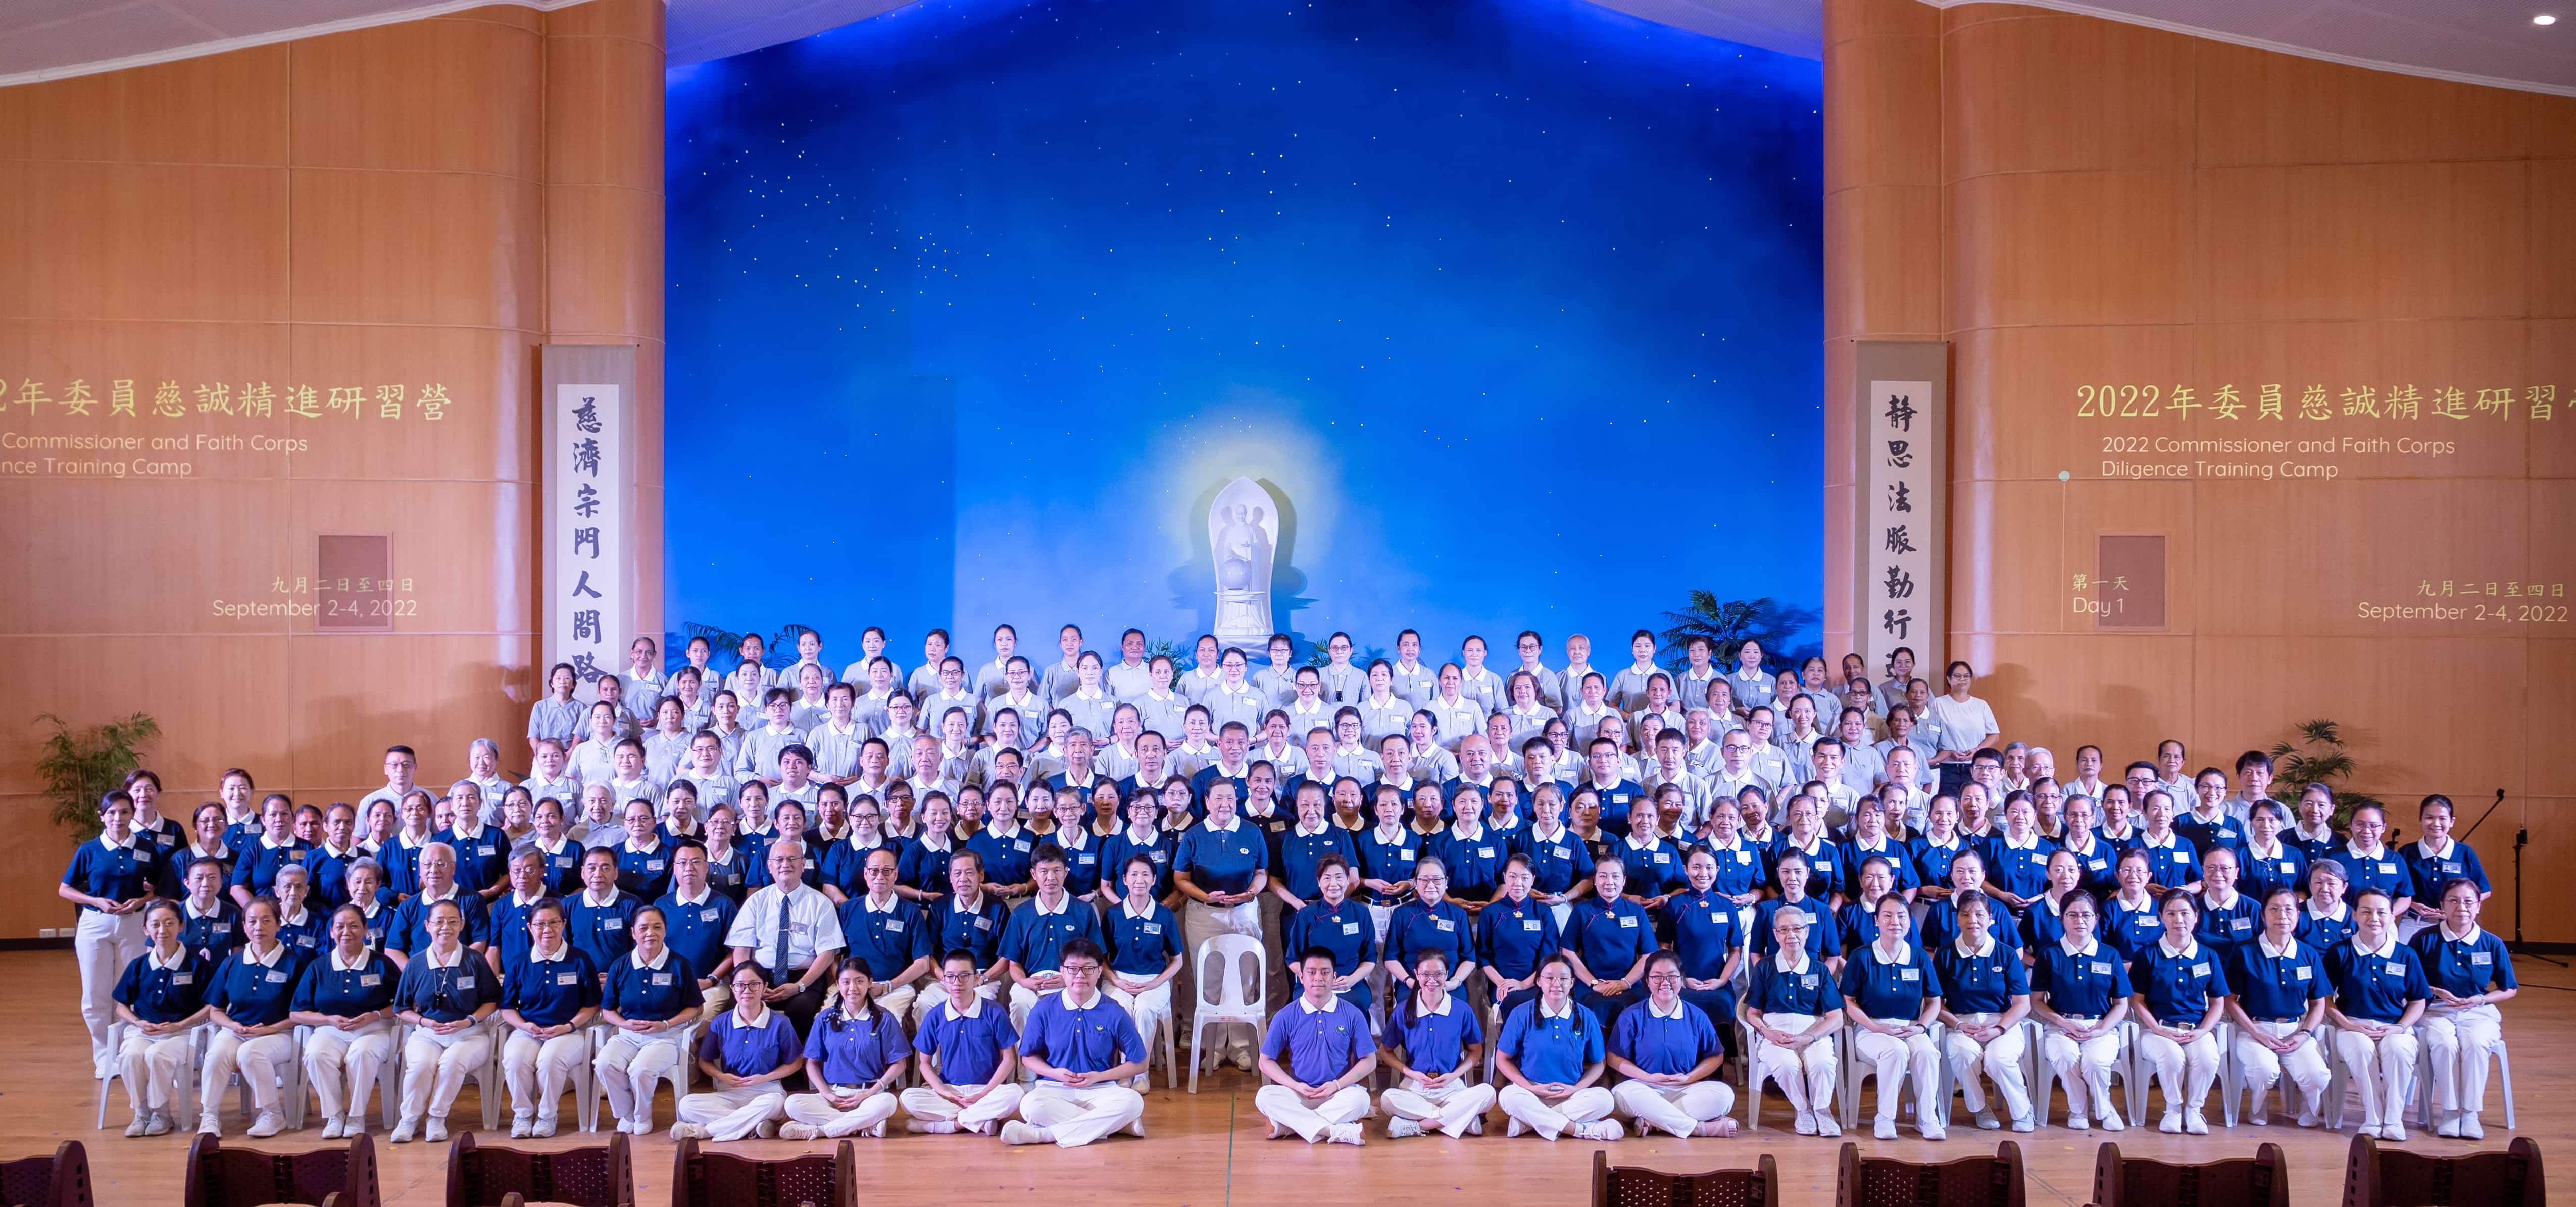 Participants of the 2022 Commissioners and Faith Corps Diligence Training Camp pose for a group photo.【Photo by Daniel Lazar】